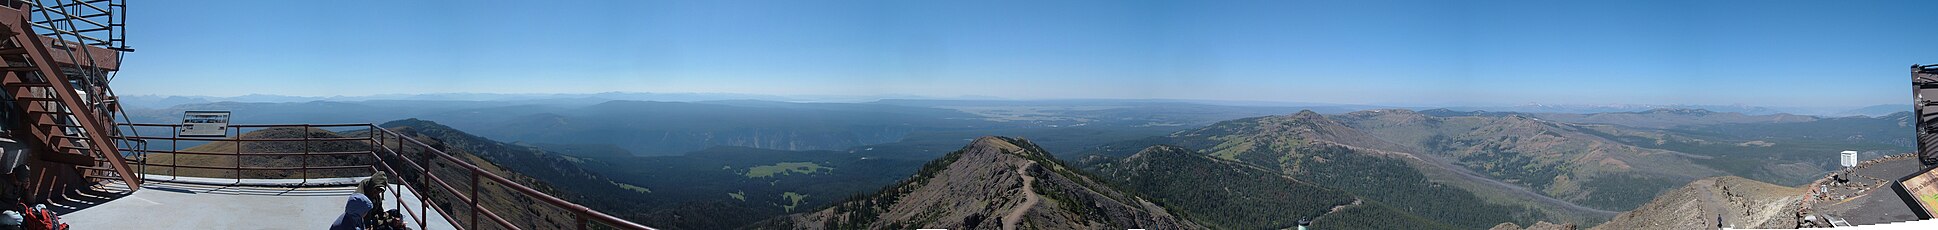 Panorama taken from the fire lookout tower on the summit of Mt. Washburn. The center of the image looks south towards the Teton Range.